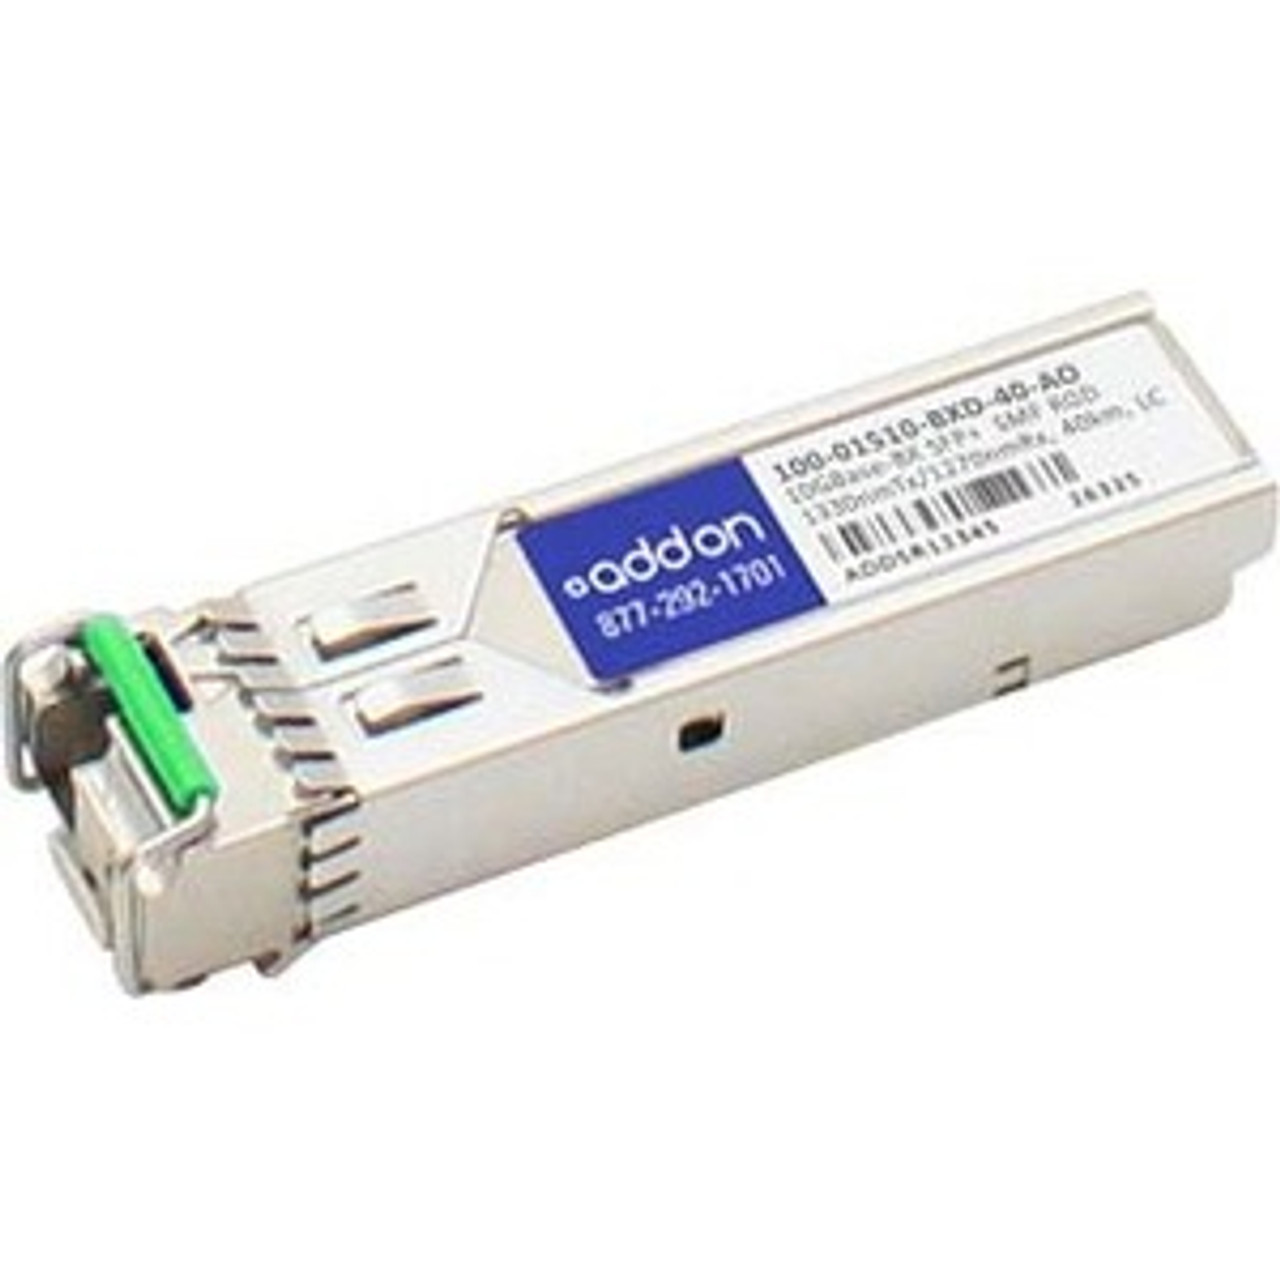 100-01510-BXD-40-AO AddOn 10Gbps 10GBase-BX-D Single-mode Fiber 40km 1330nmTX/1270nmRX LC Connector SFP+ Transceiver Module for Calix Compatible